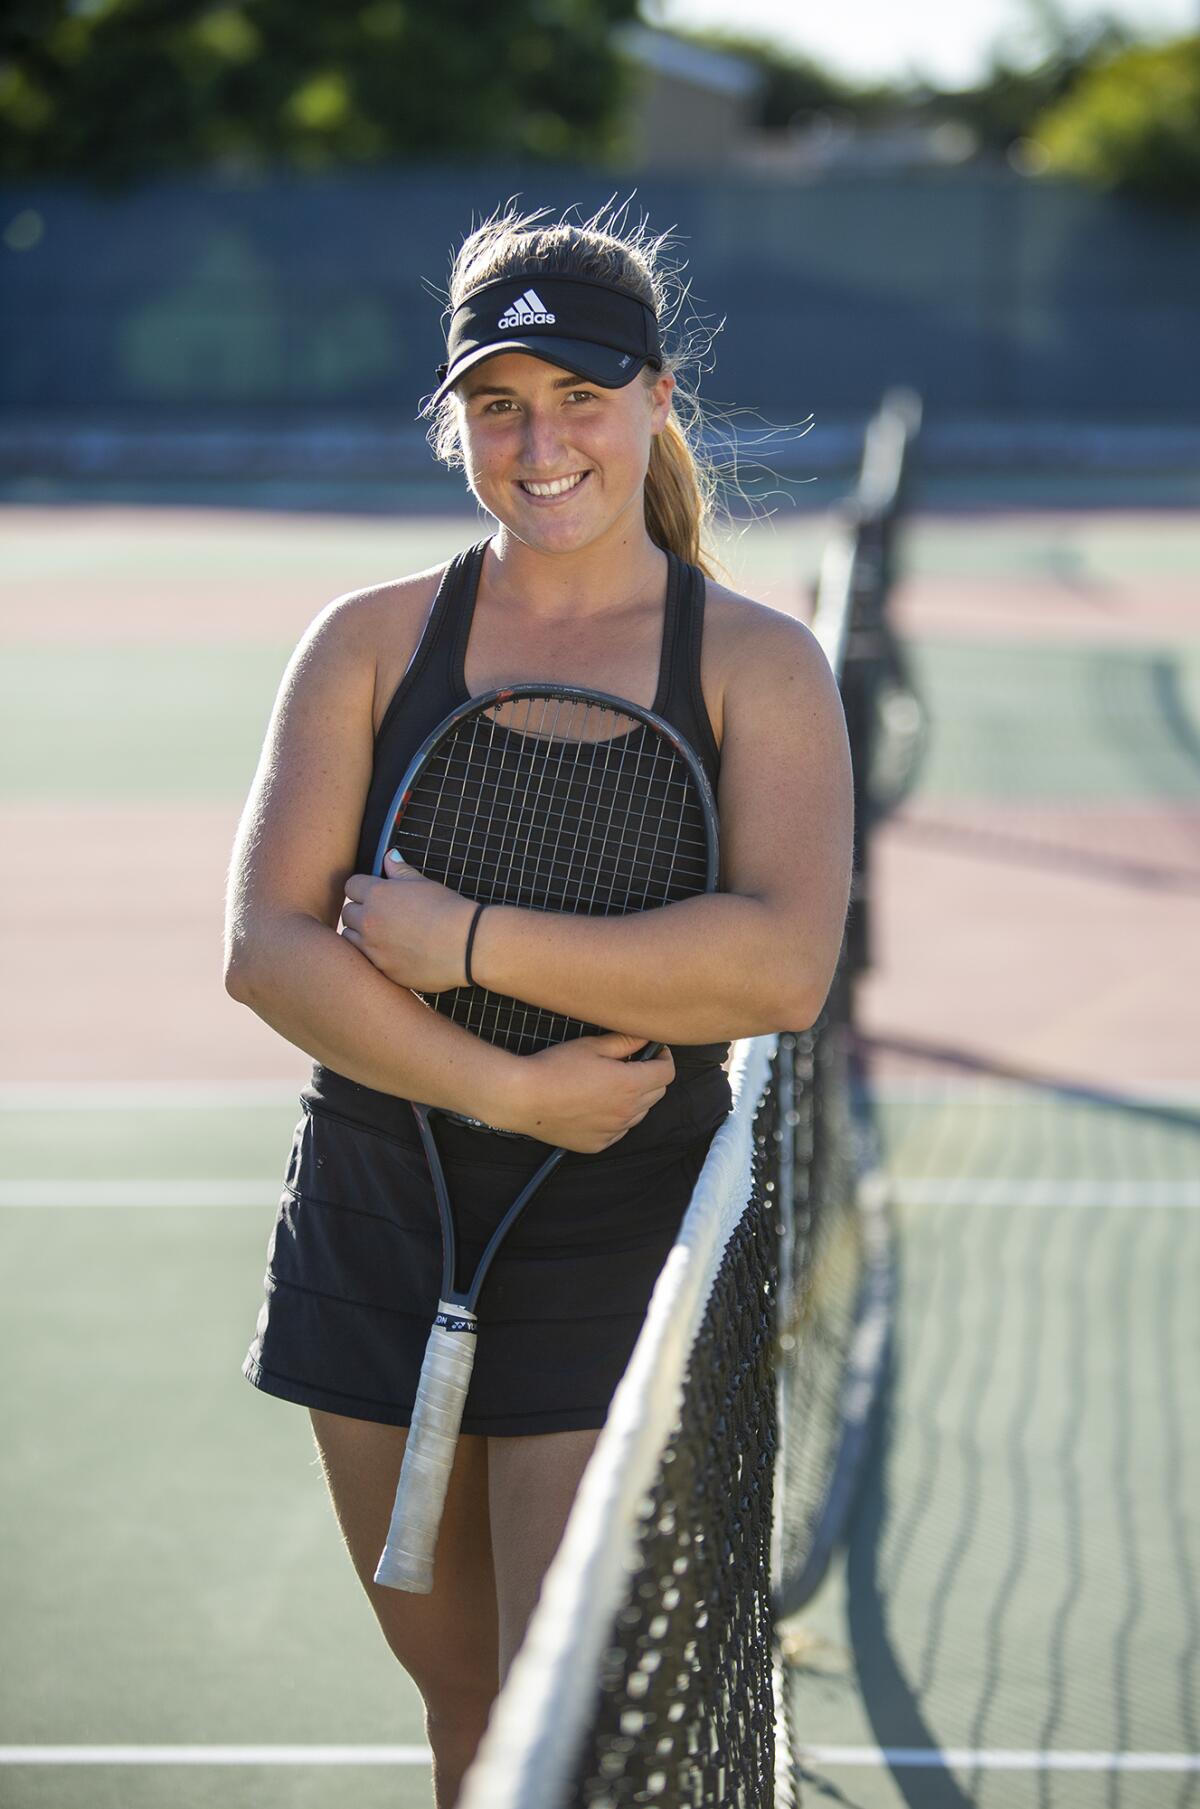 Huntington Beach's Kaytlin Taylor comes from a tennis family. Her grandfather, David Sanderlin, played at UCLA, her mother, Michelle, played in high school in San Diego, and her brother, Dylan, plays at UC San Diego.